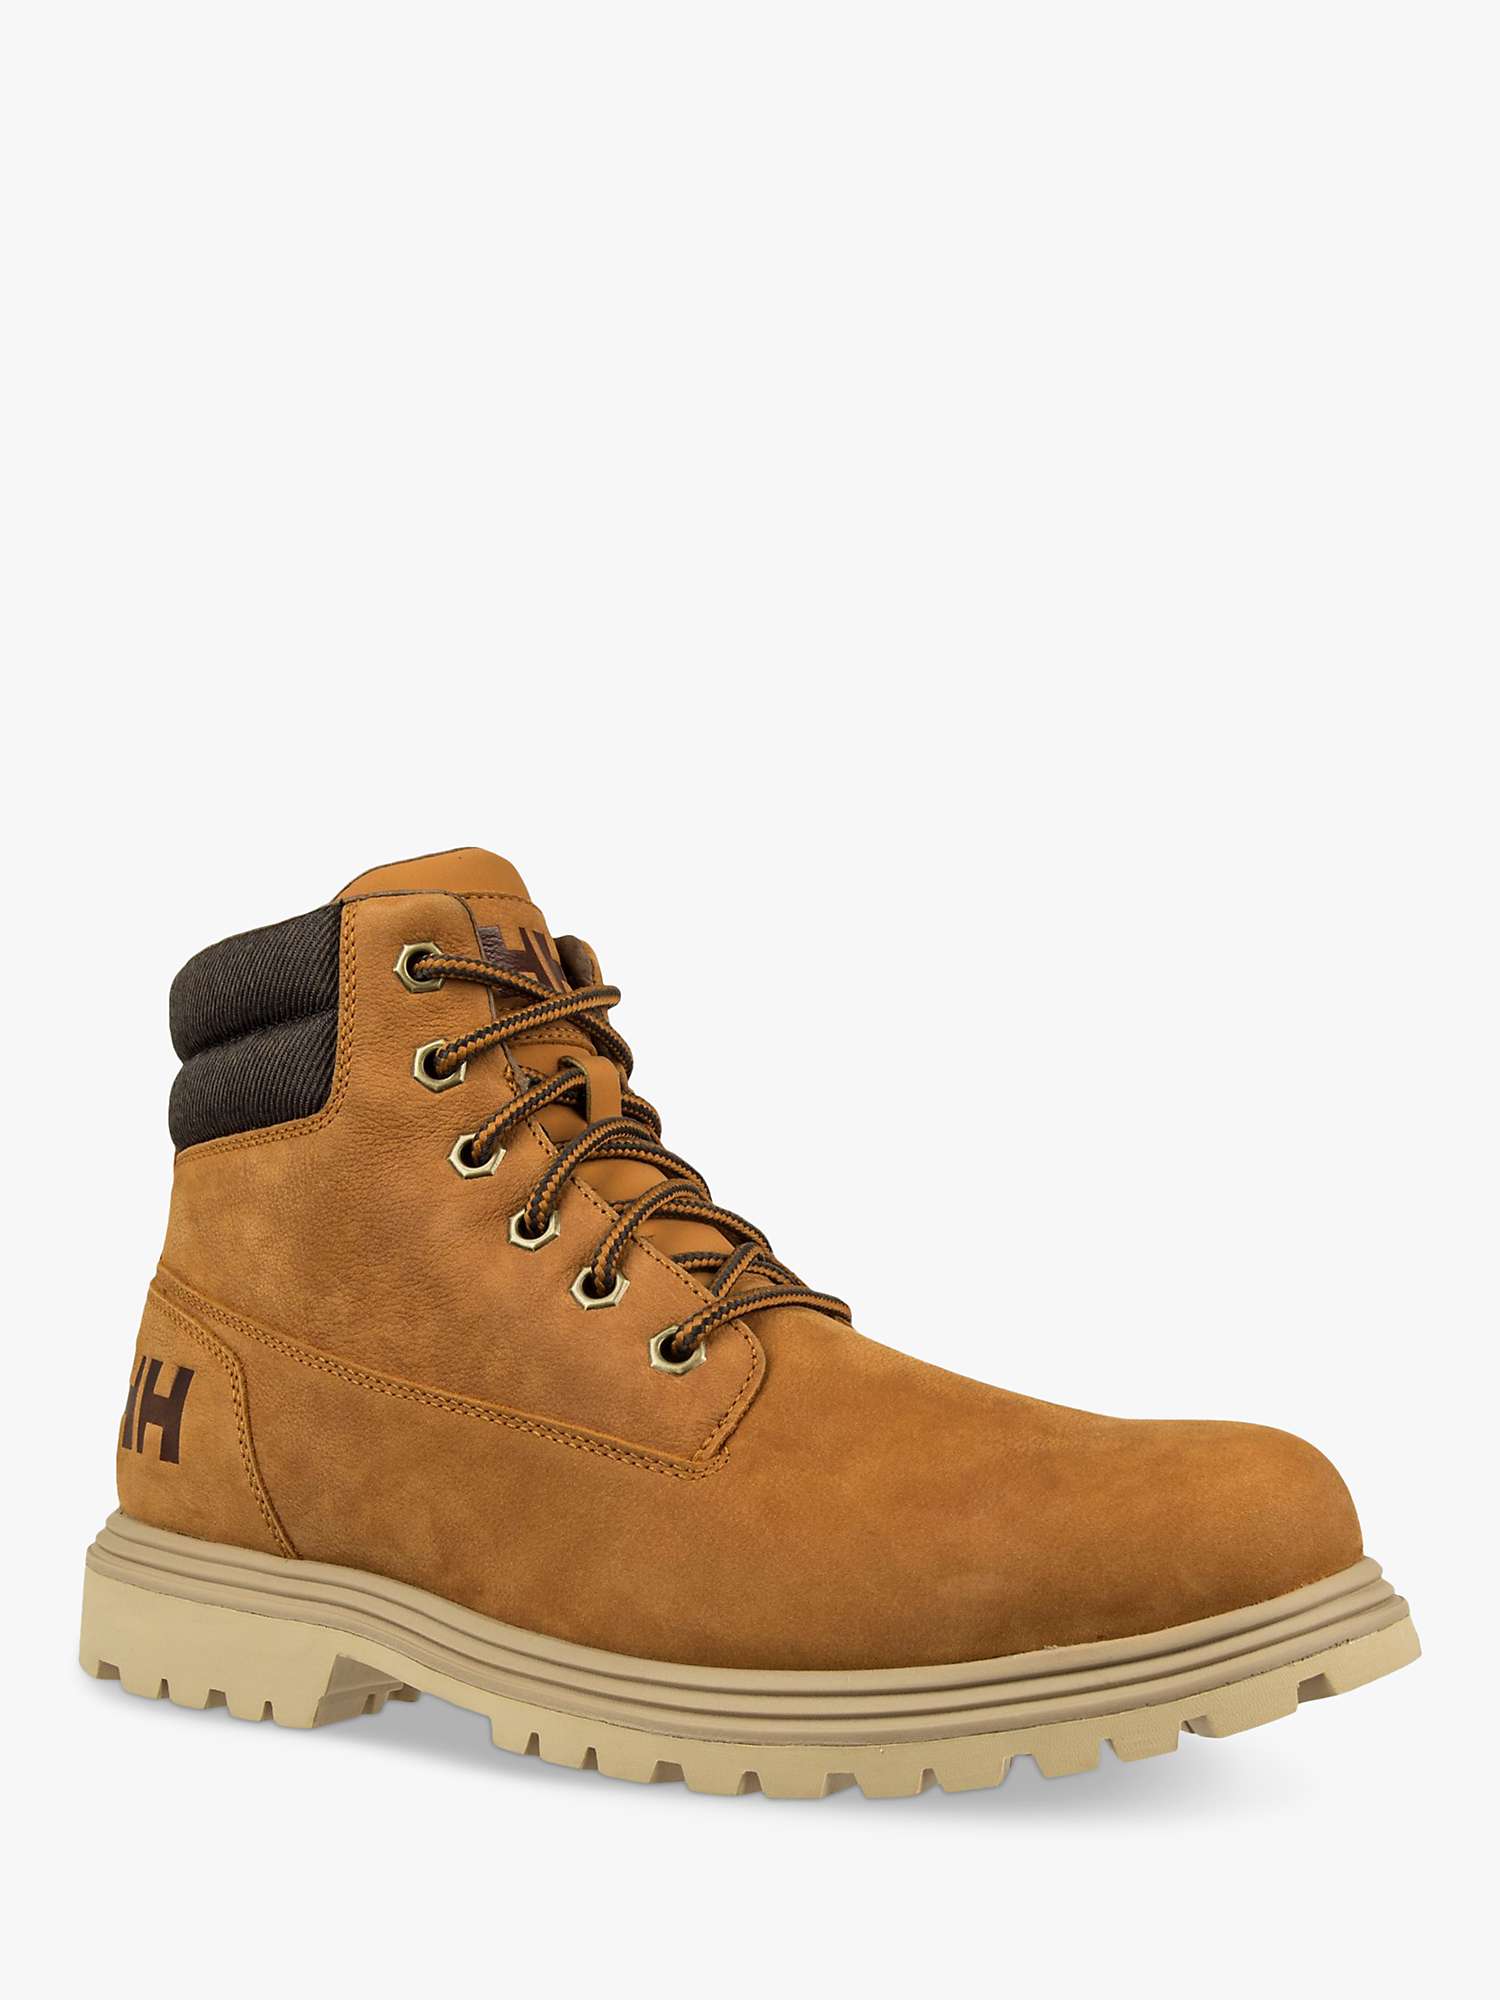 Buy Helly Hansen Fremont Leather Lace Up Ankle Boots, Honey Online at johnlewis.com